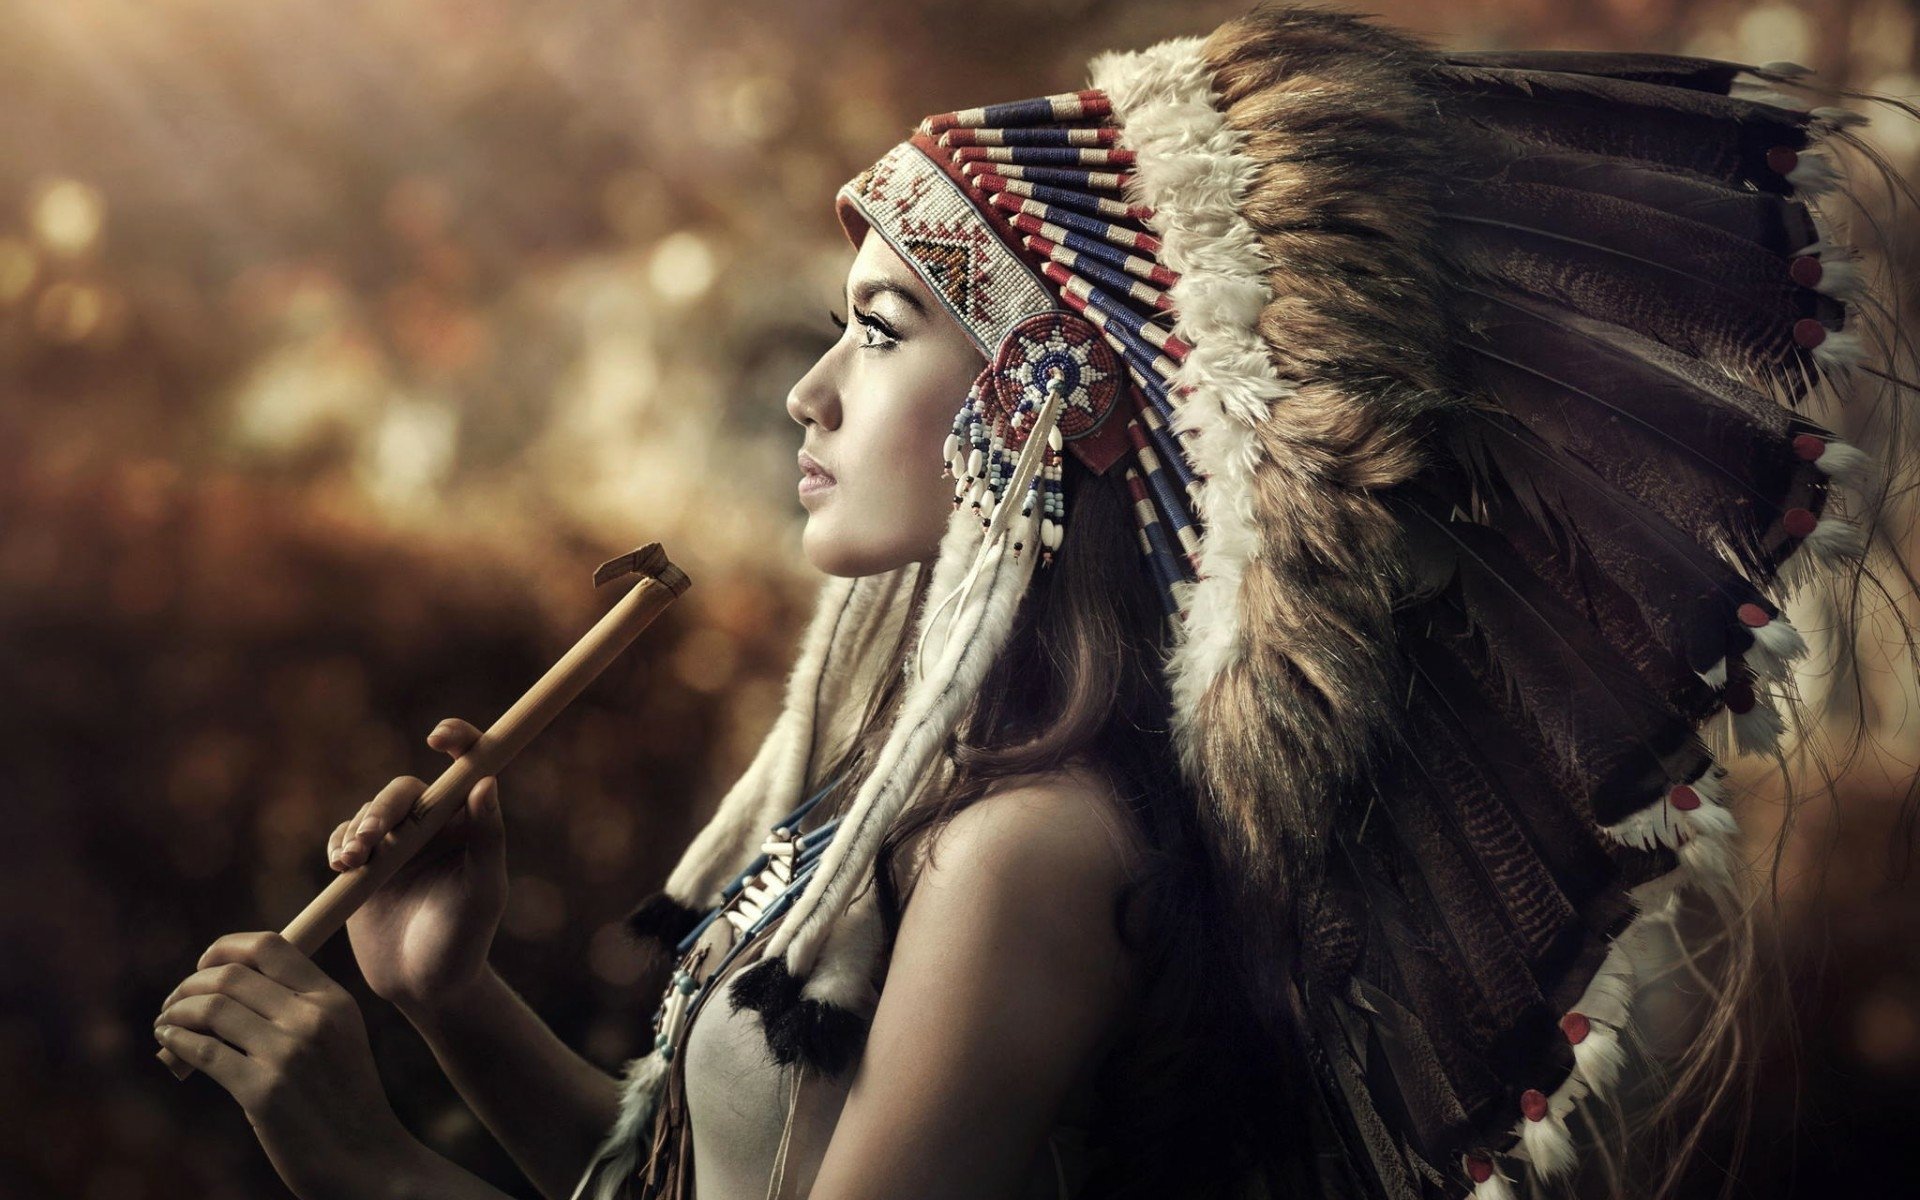 HD desktop wallpaper featuring a woman in Native American attire playing a flute, set against a softly blurred autumnal background.